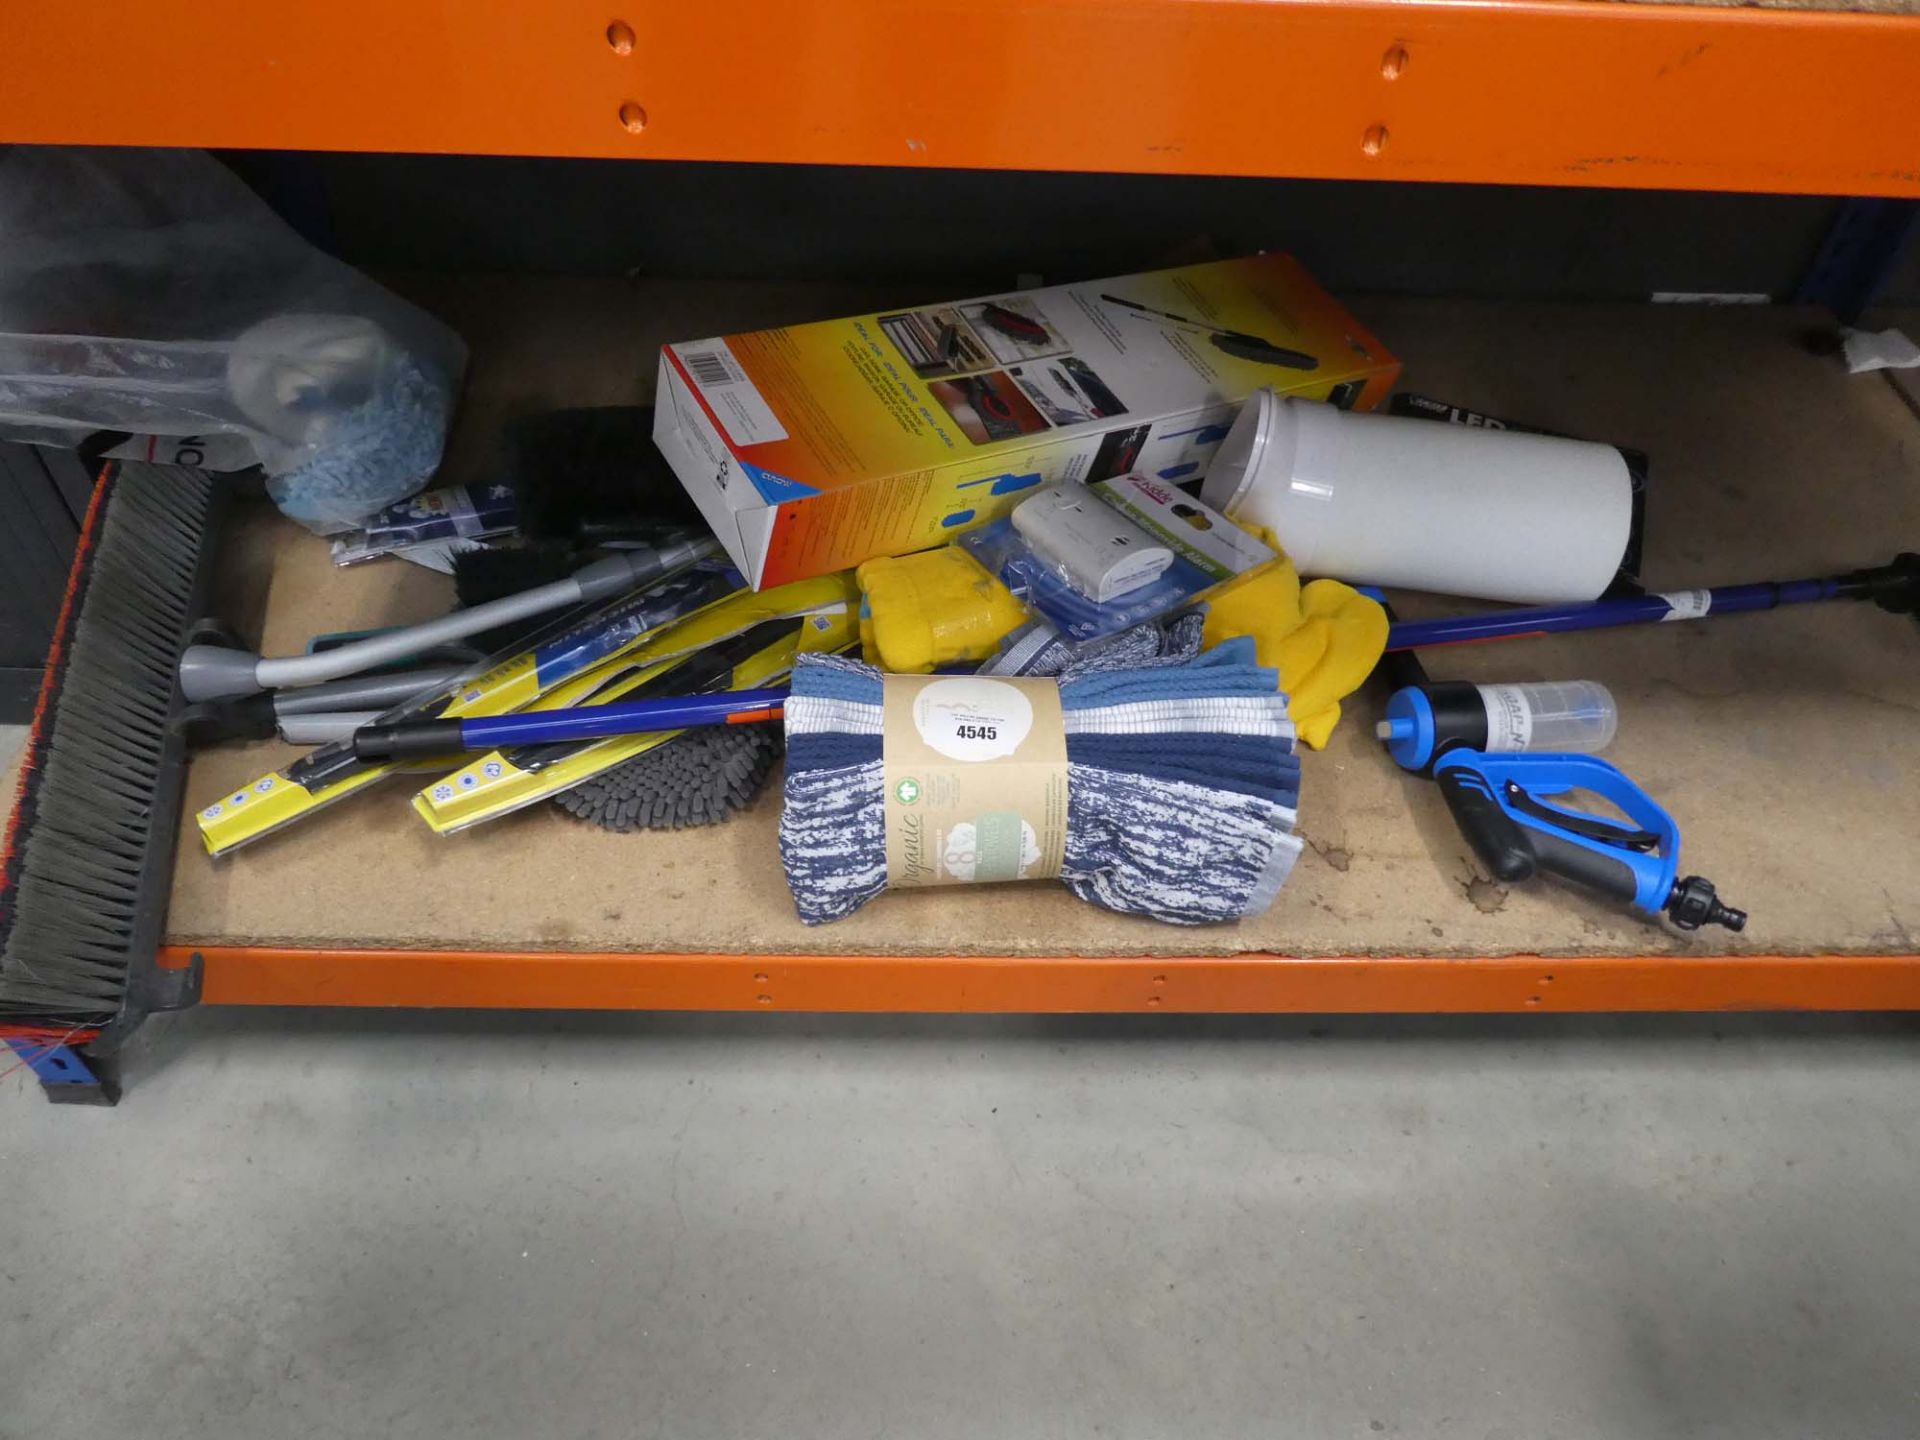 Underbay of items incl. telescopic brushes, broom heads, mops and cloths